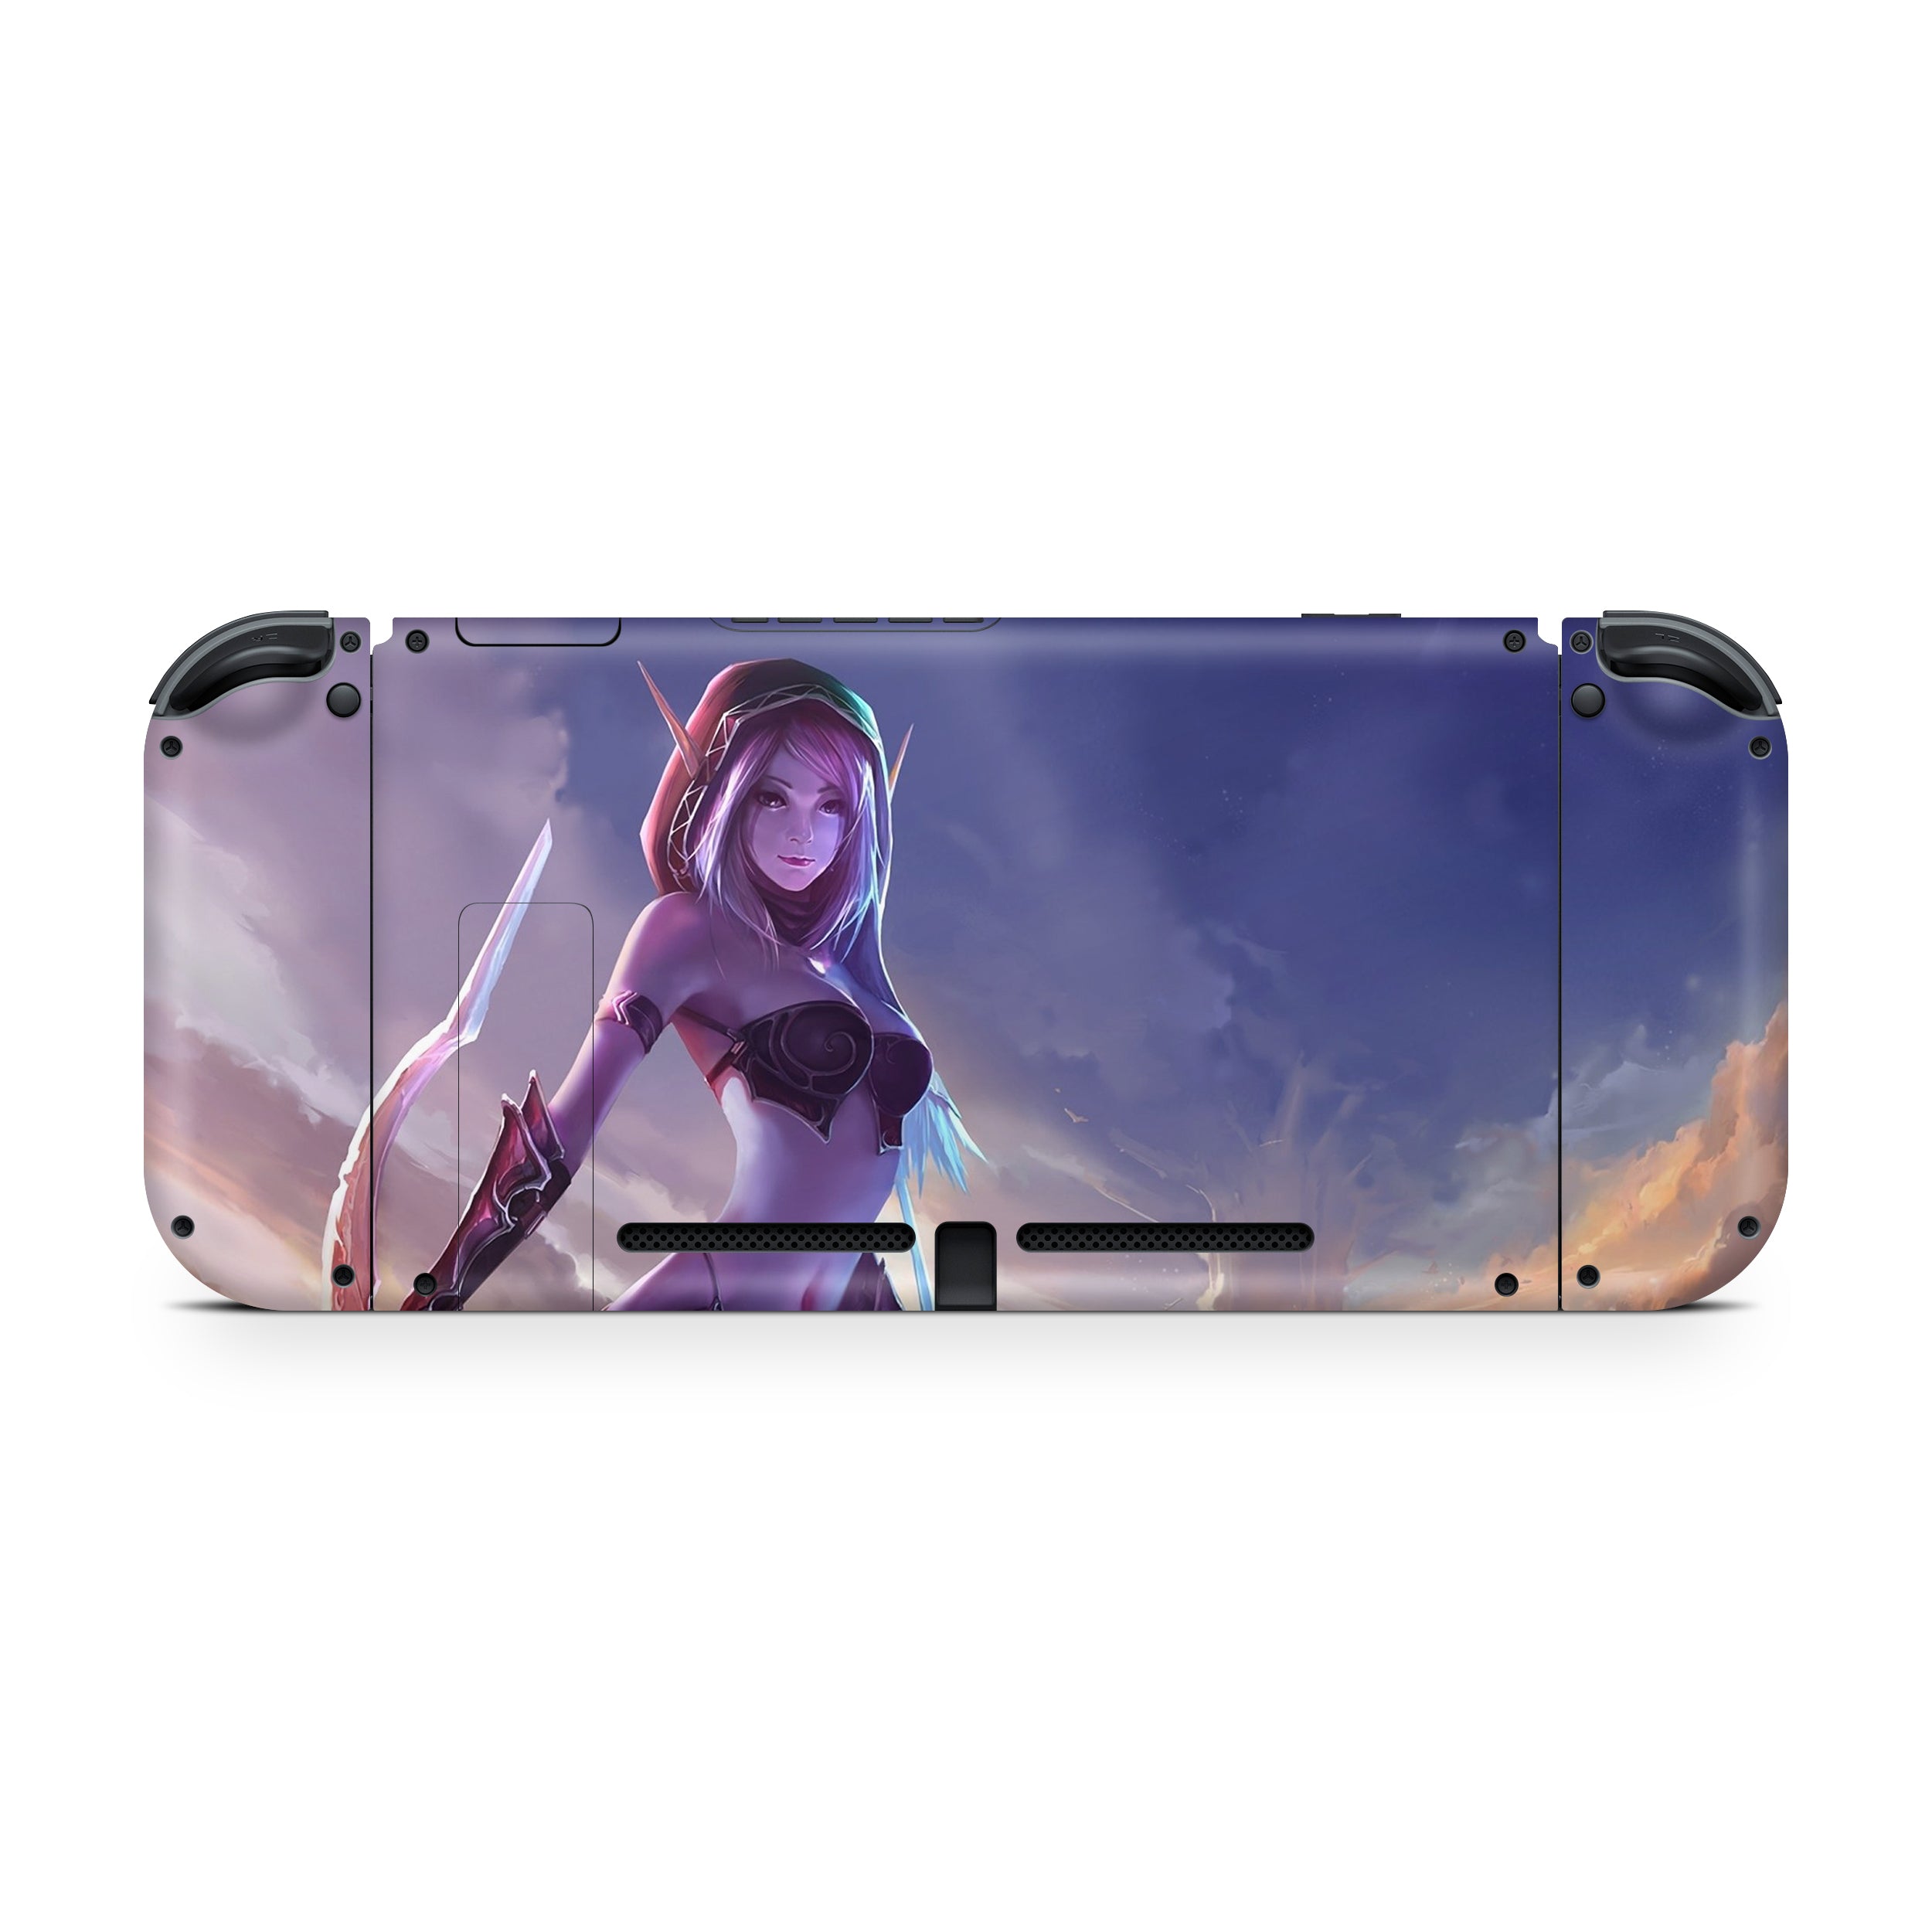 A video game skin featuring a World of Warcraft design for the Nintendo Switch.